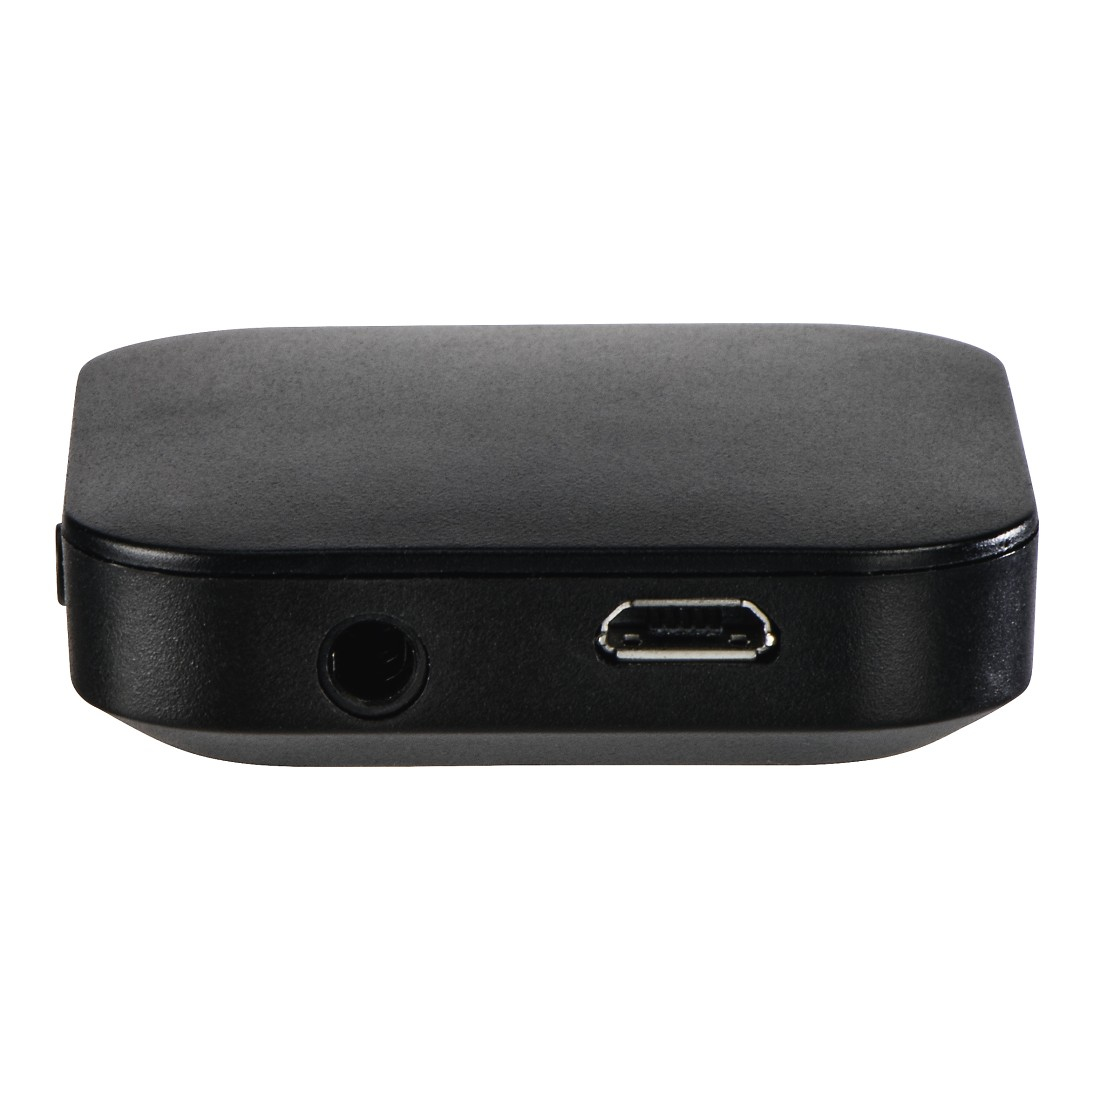 Hama Bluetooth Audio Transmitter/Receiver, 2in1 Adapter